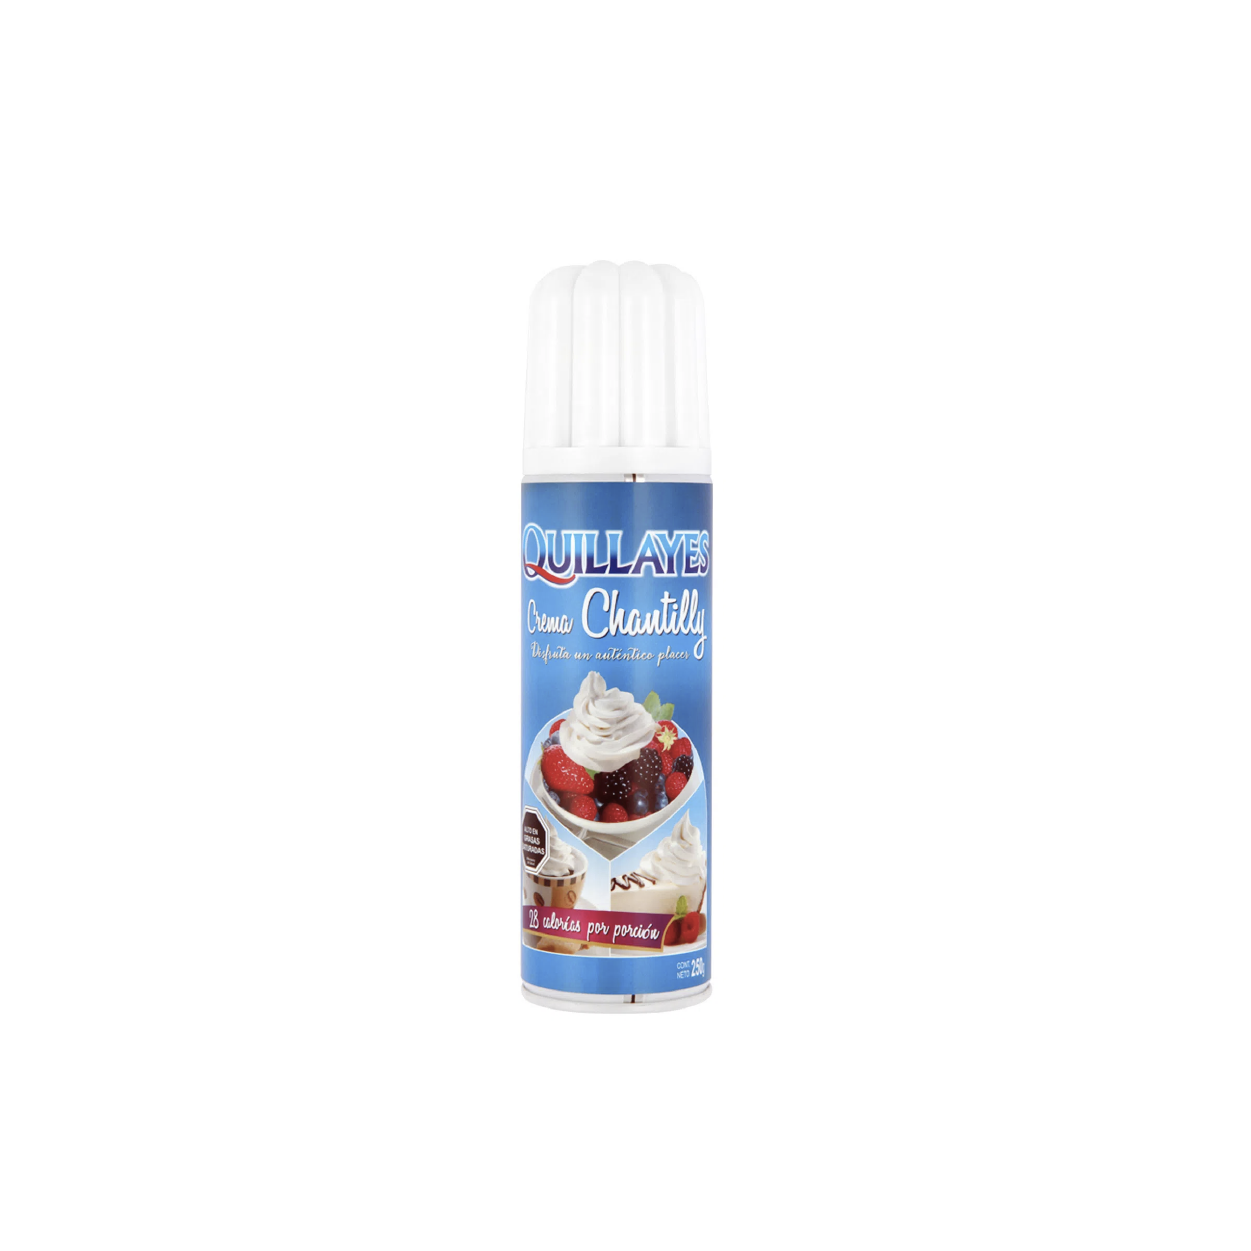 Crema chantilly Quillayes 250 grs